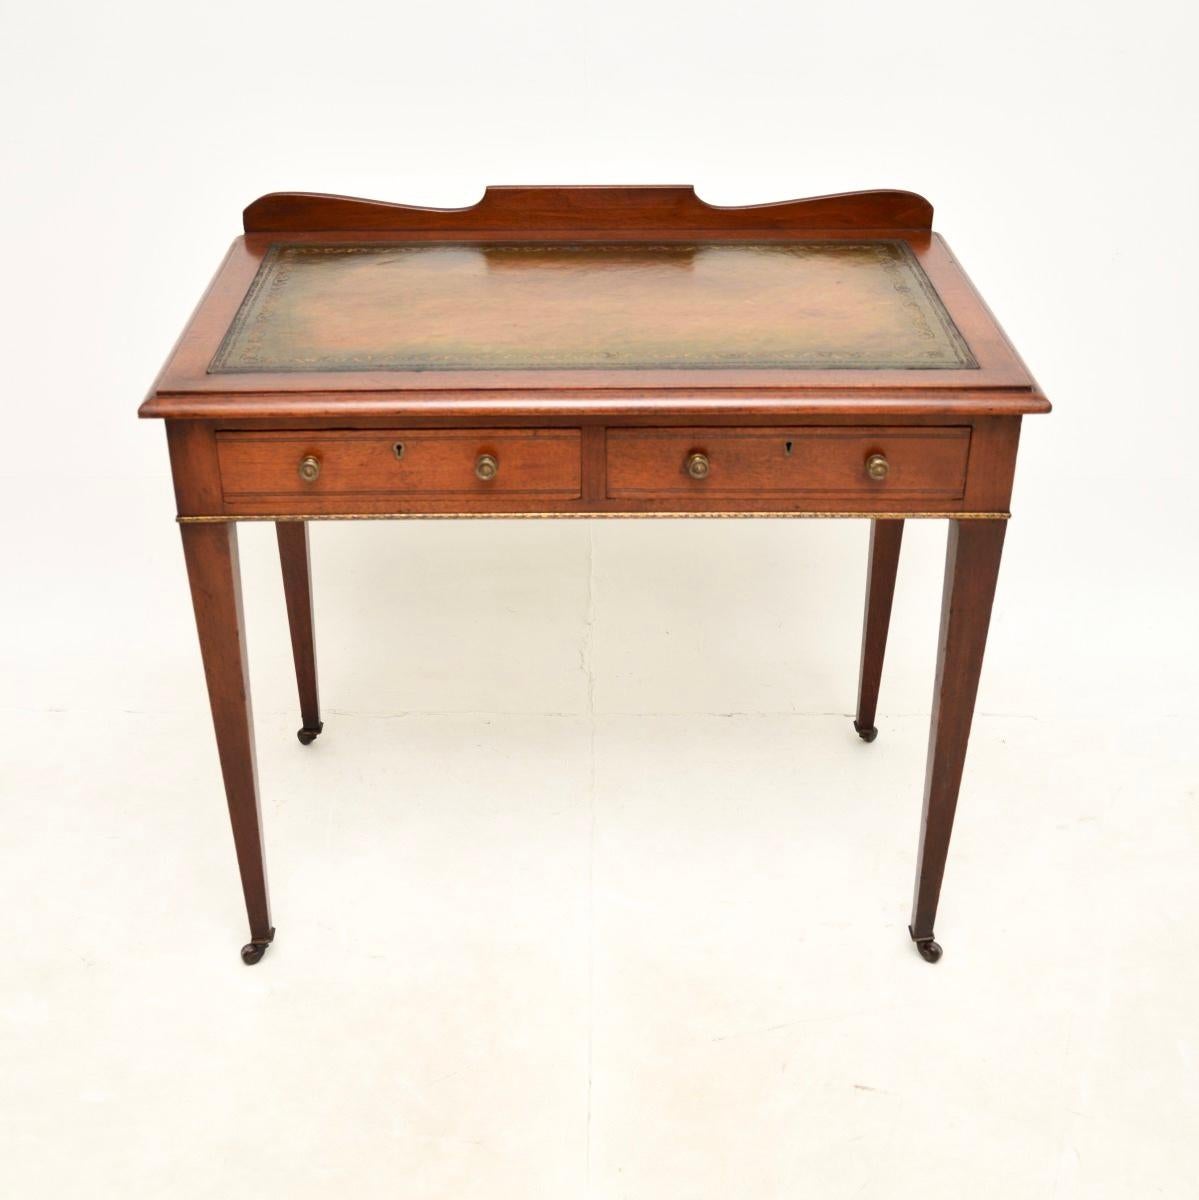 A lovely antique Edwardian desk / writing table, made in England and dating from around the 1890-1910 period.

It is of superb quality, with a beautiful and elegant design. The top has an inset leather writing surface with tooled edges and a